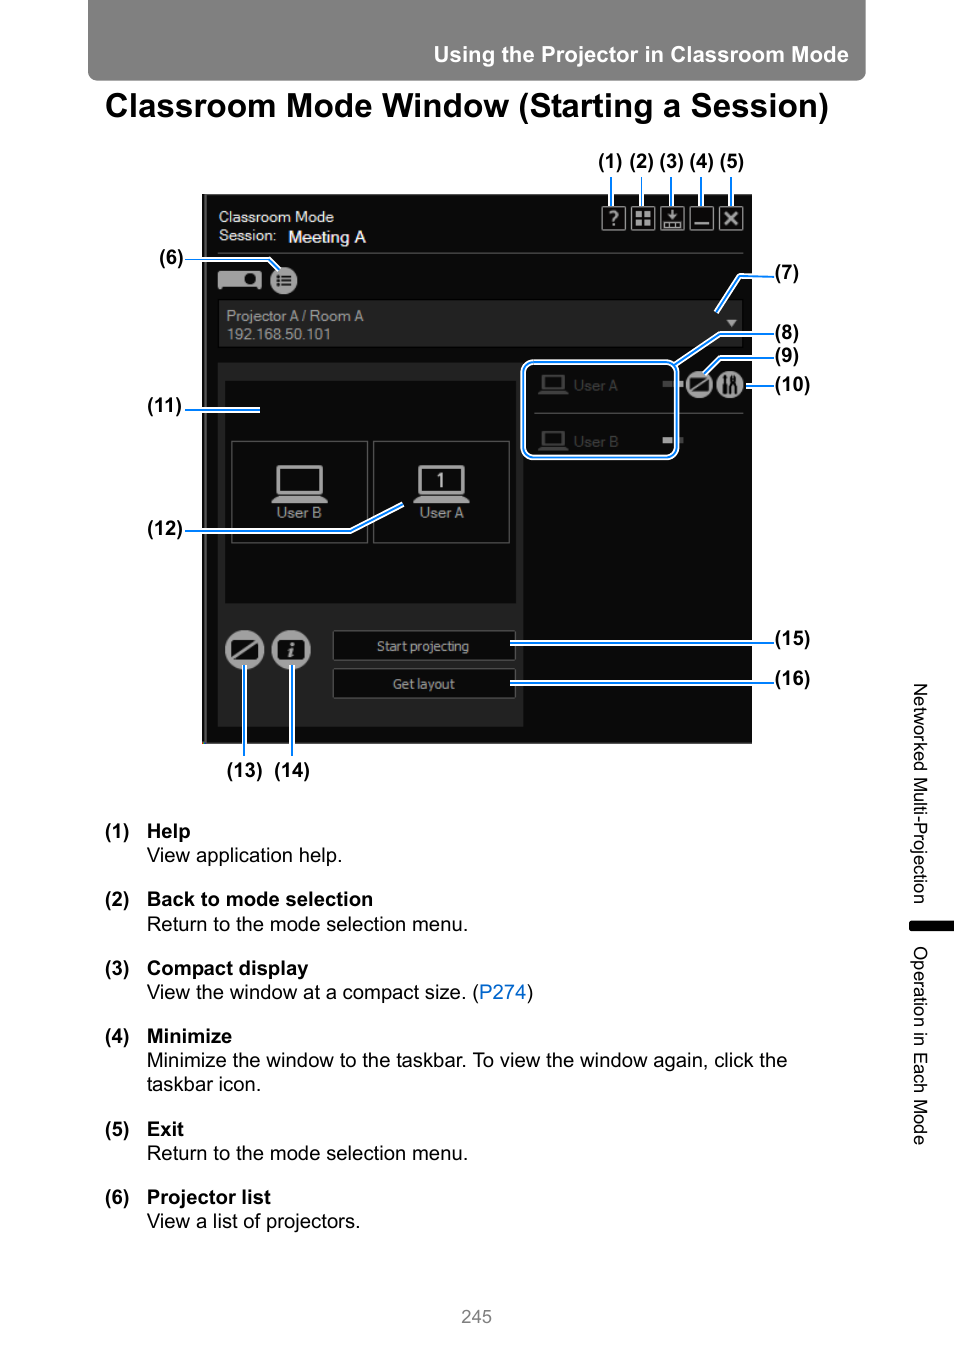 Classroom mode window (starting a session), P245 | Canon XEED WUX450 User Manual | Page 245 / 314